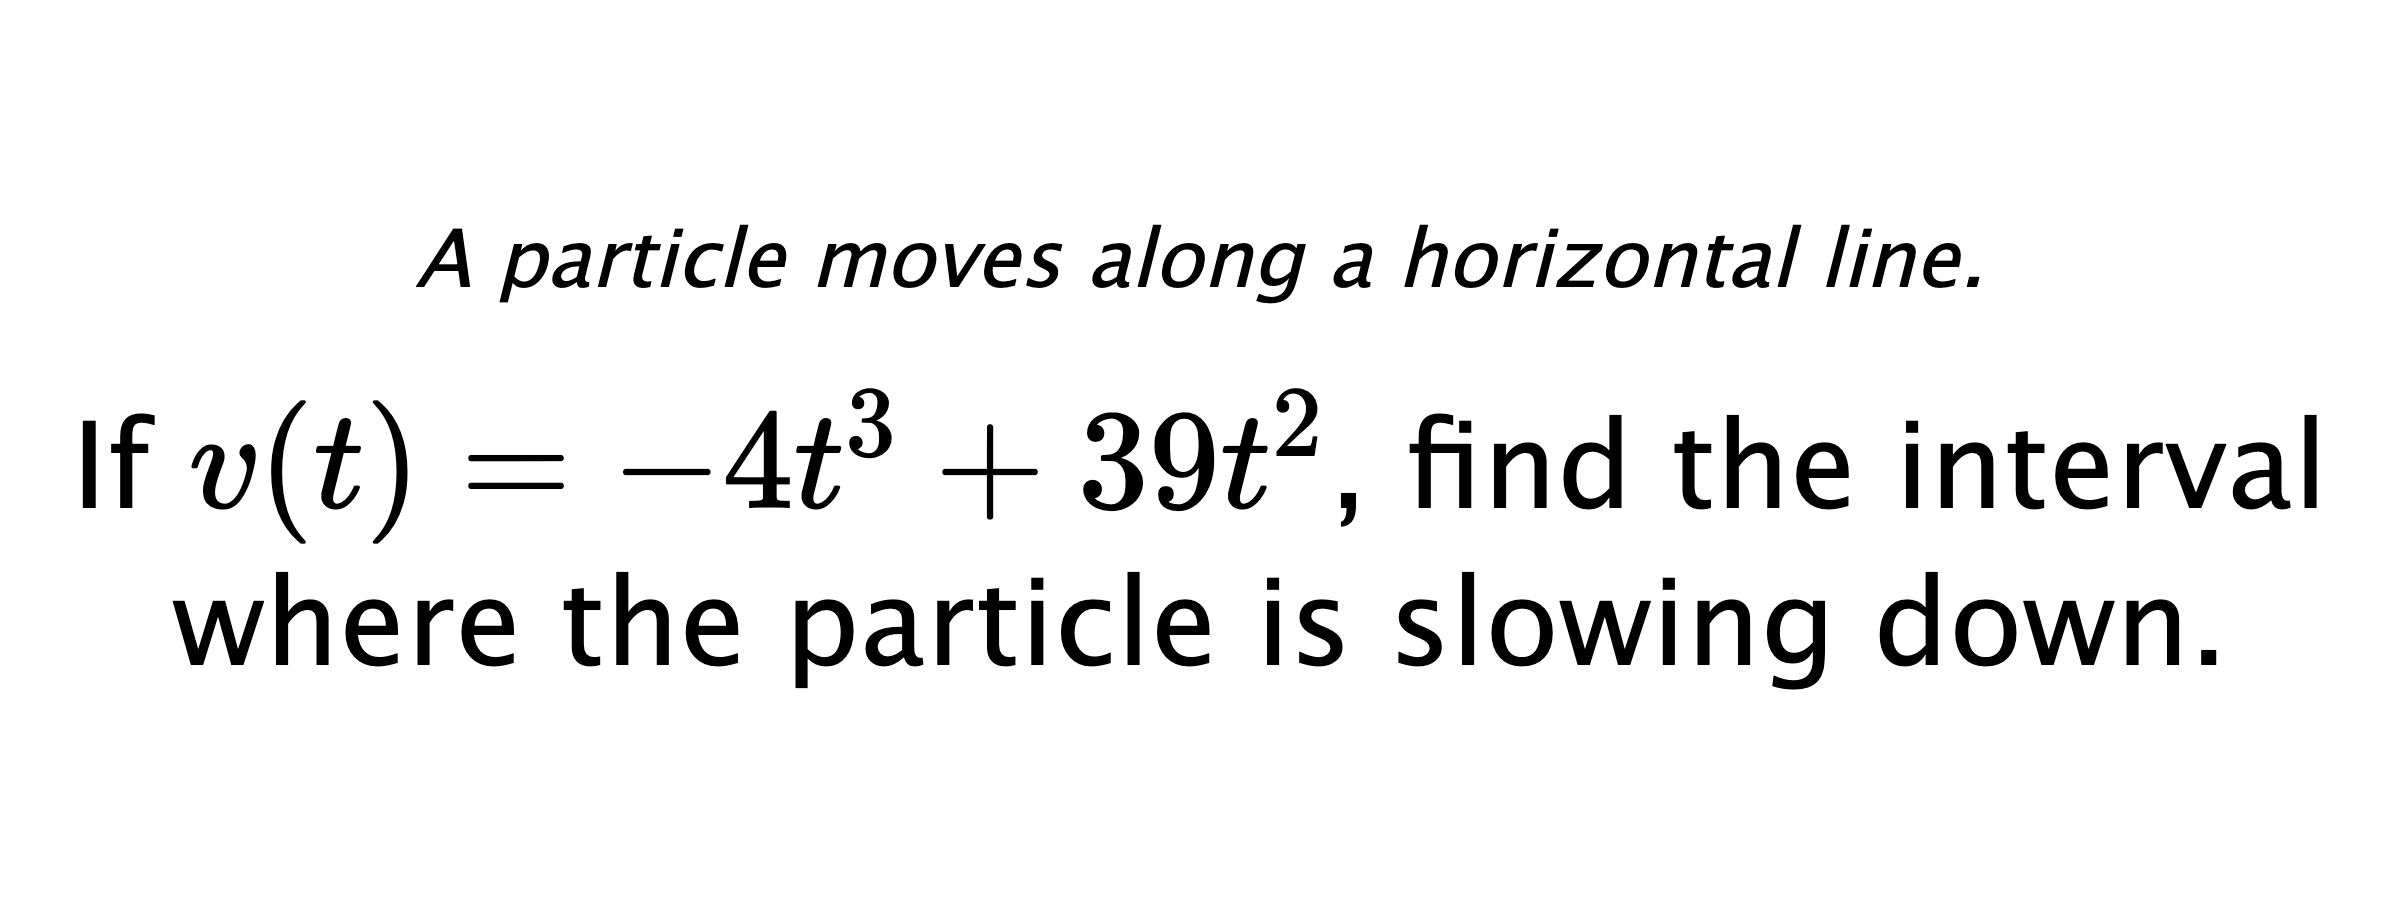 A particle moves along a horizontal line. If $ v(t)=-4t^3+39t^2 $, find the interval where the particle is slowing down.